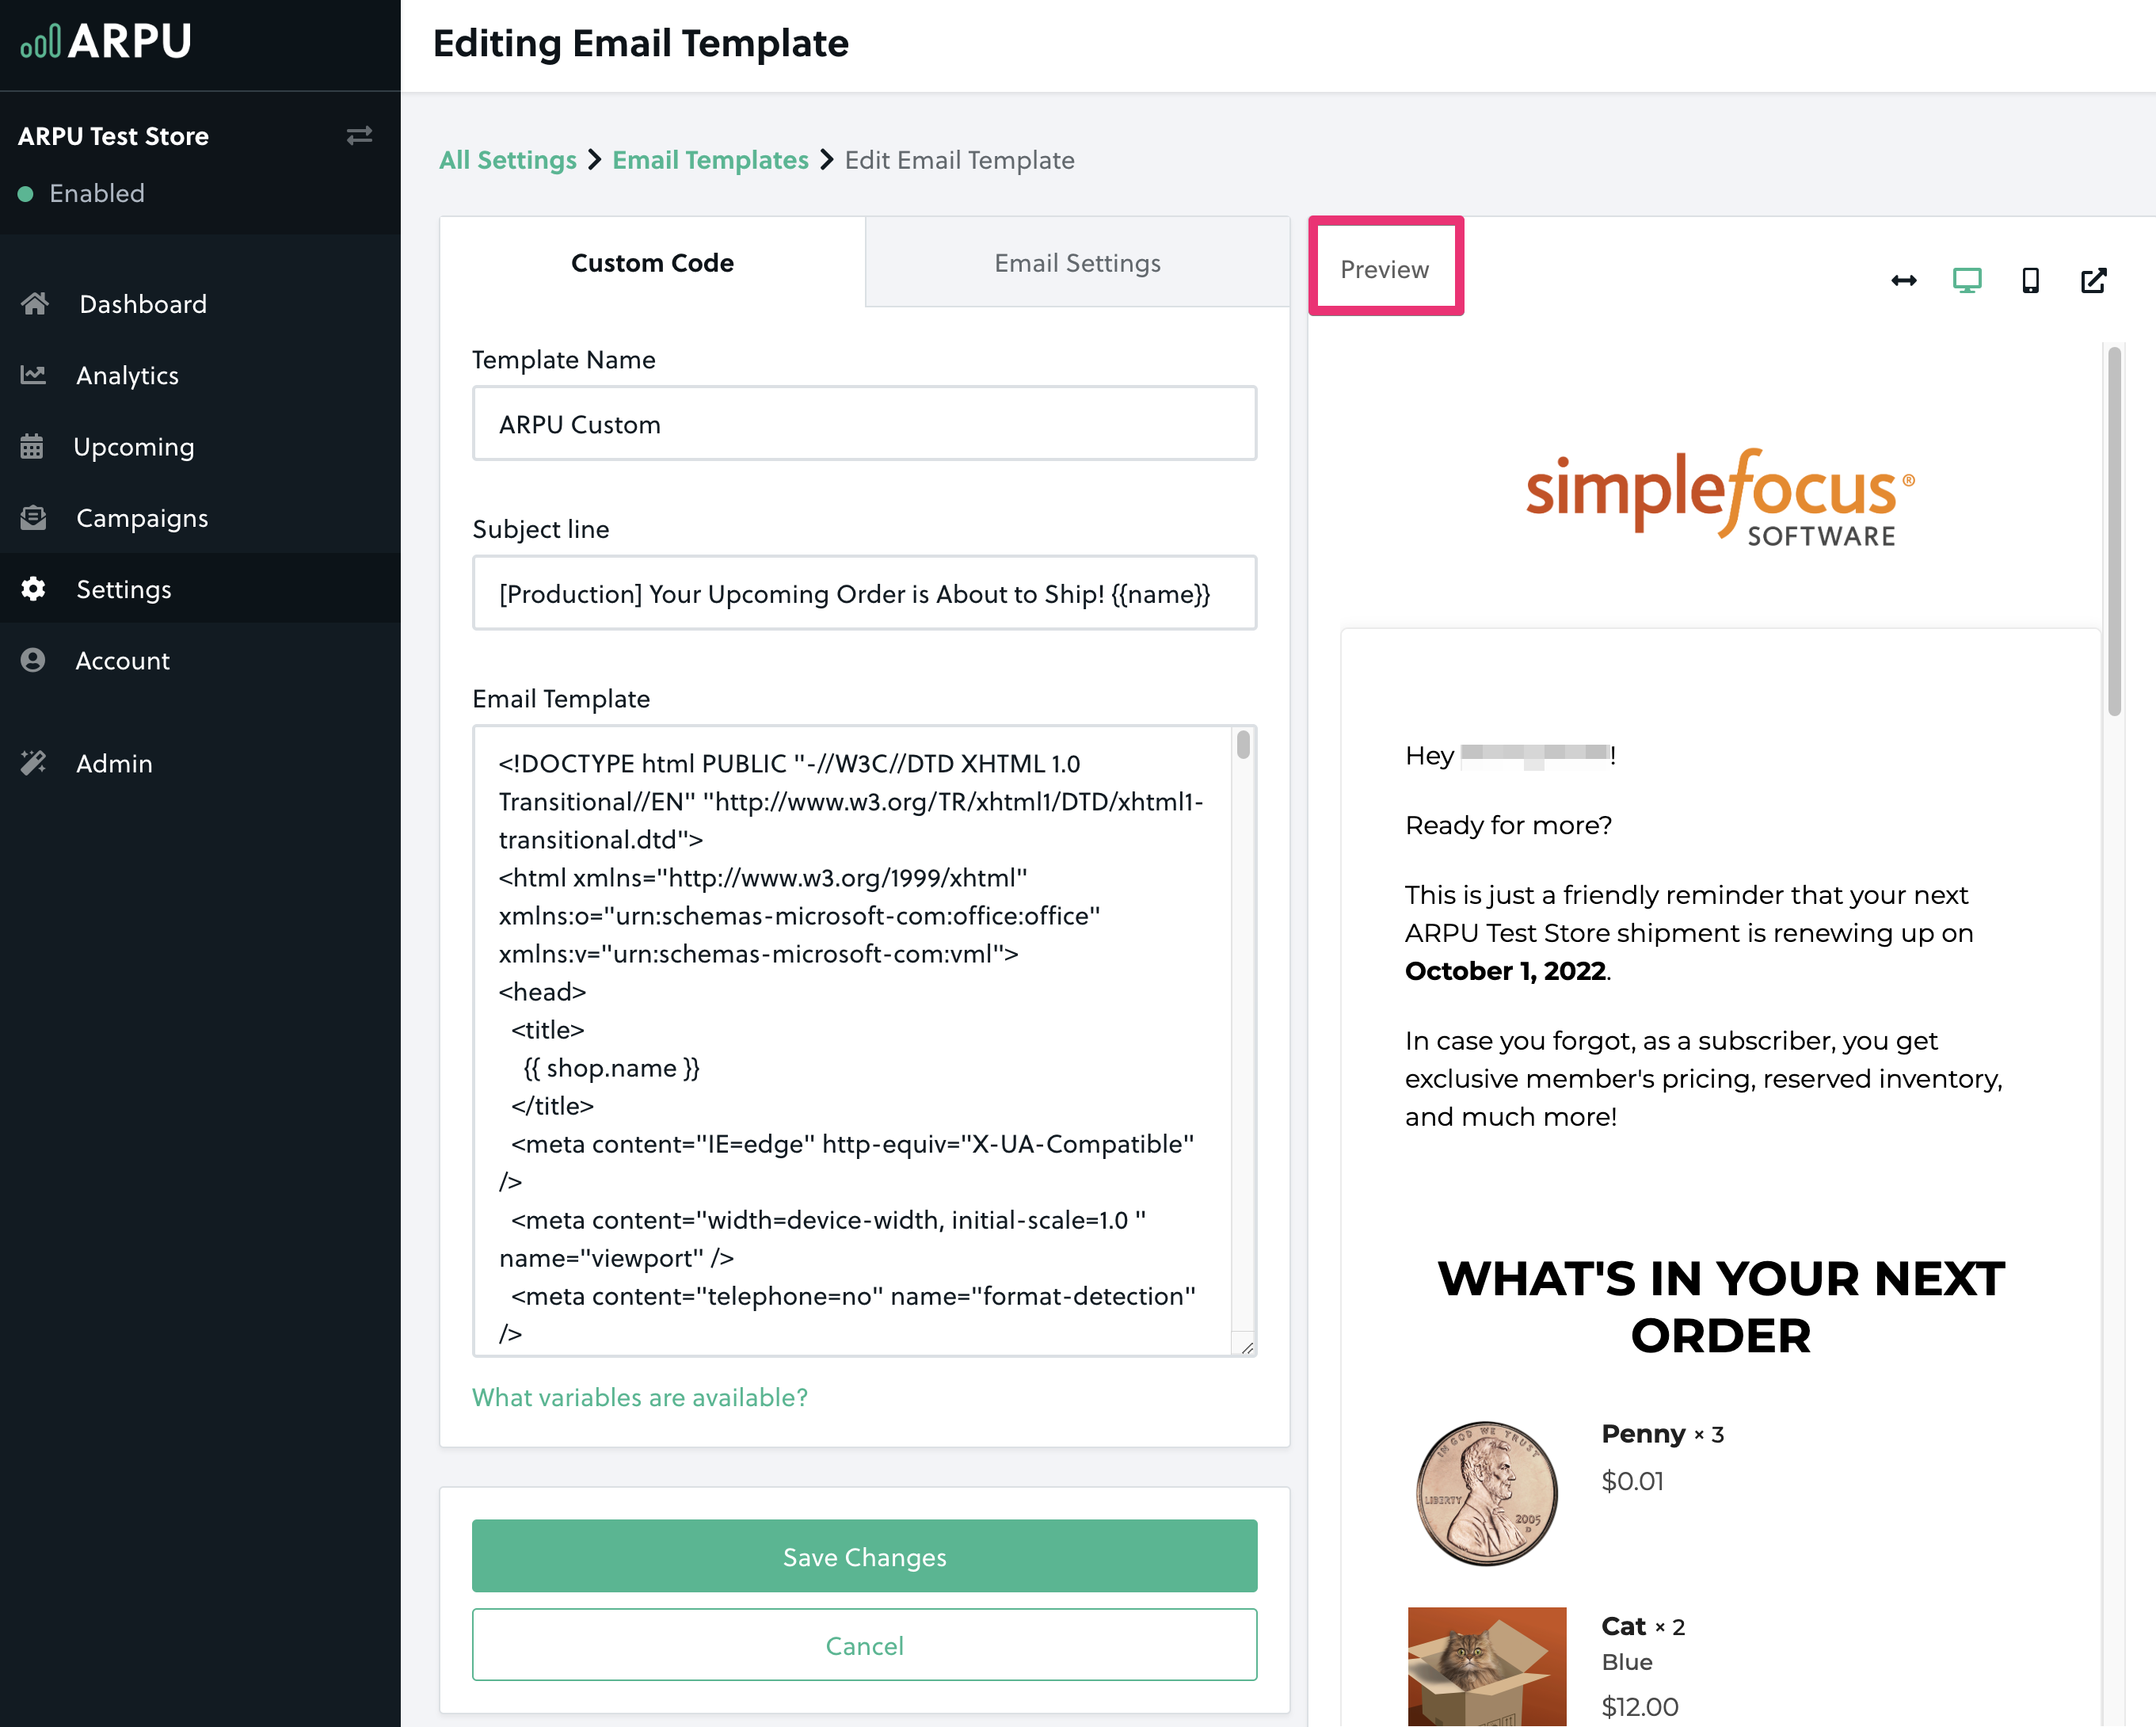 Preview feature in the email template setting